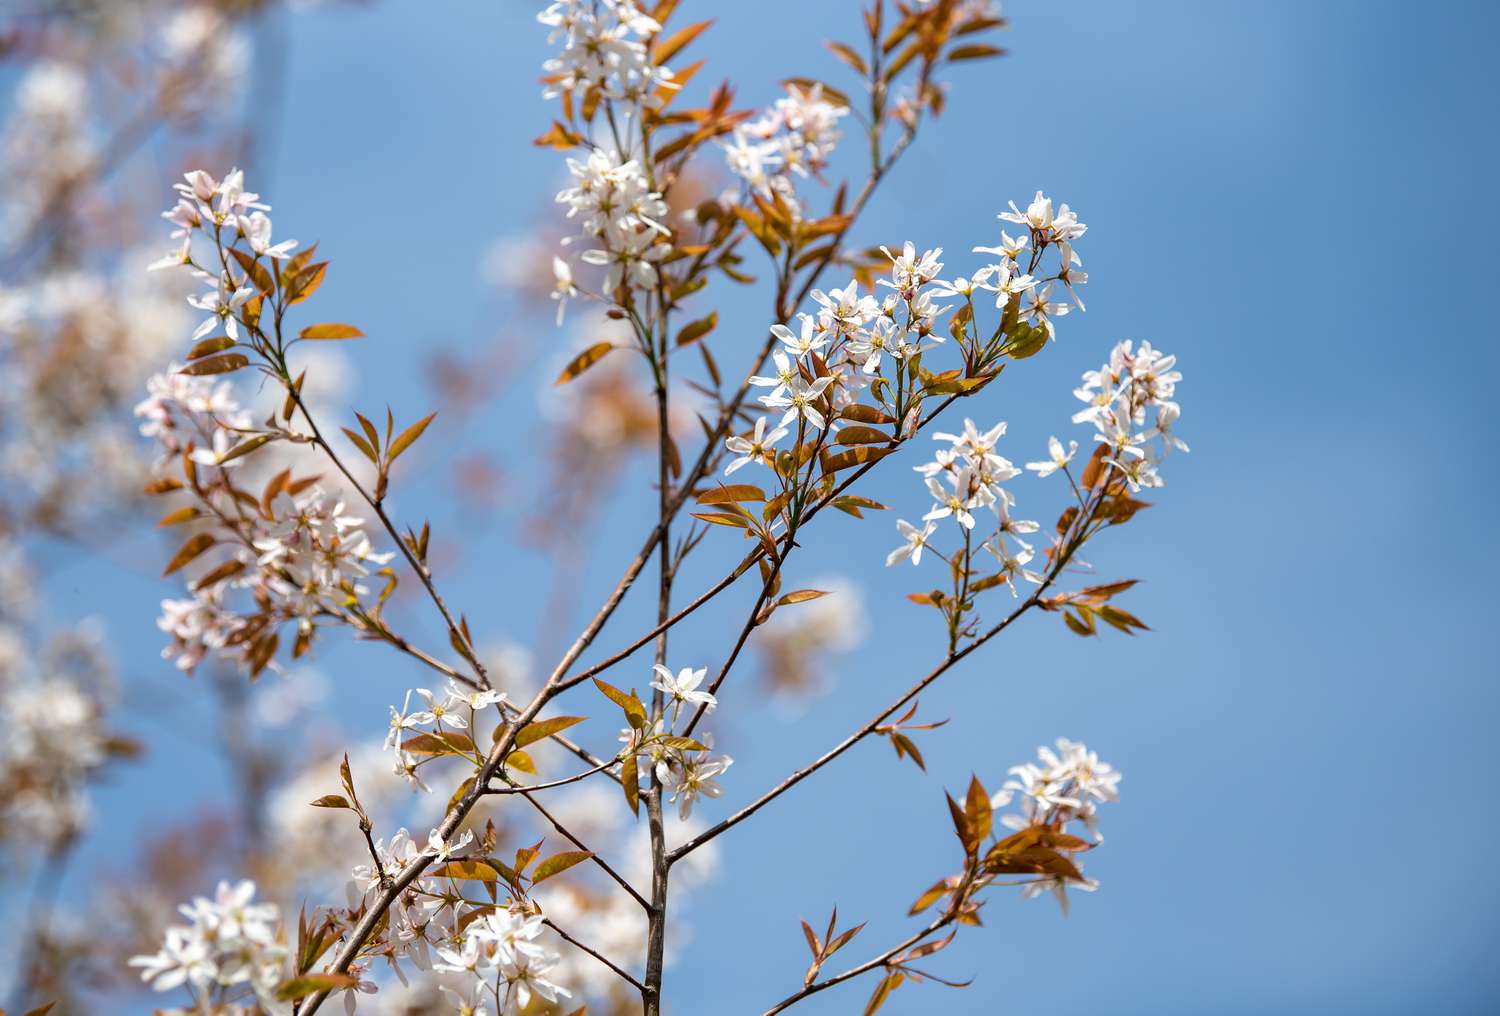 Serviceberry tree with bare branches with tiny white flowers and tiny brown leaves